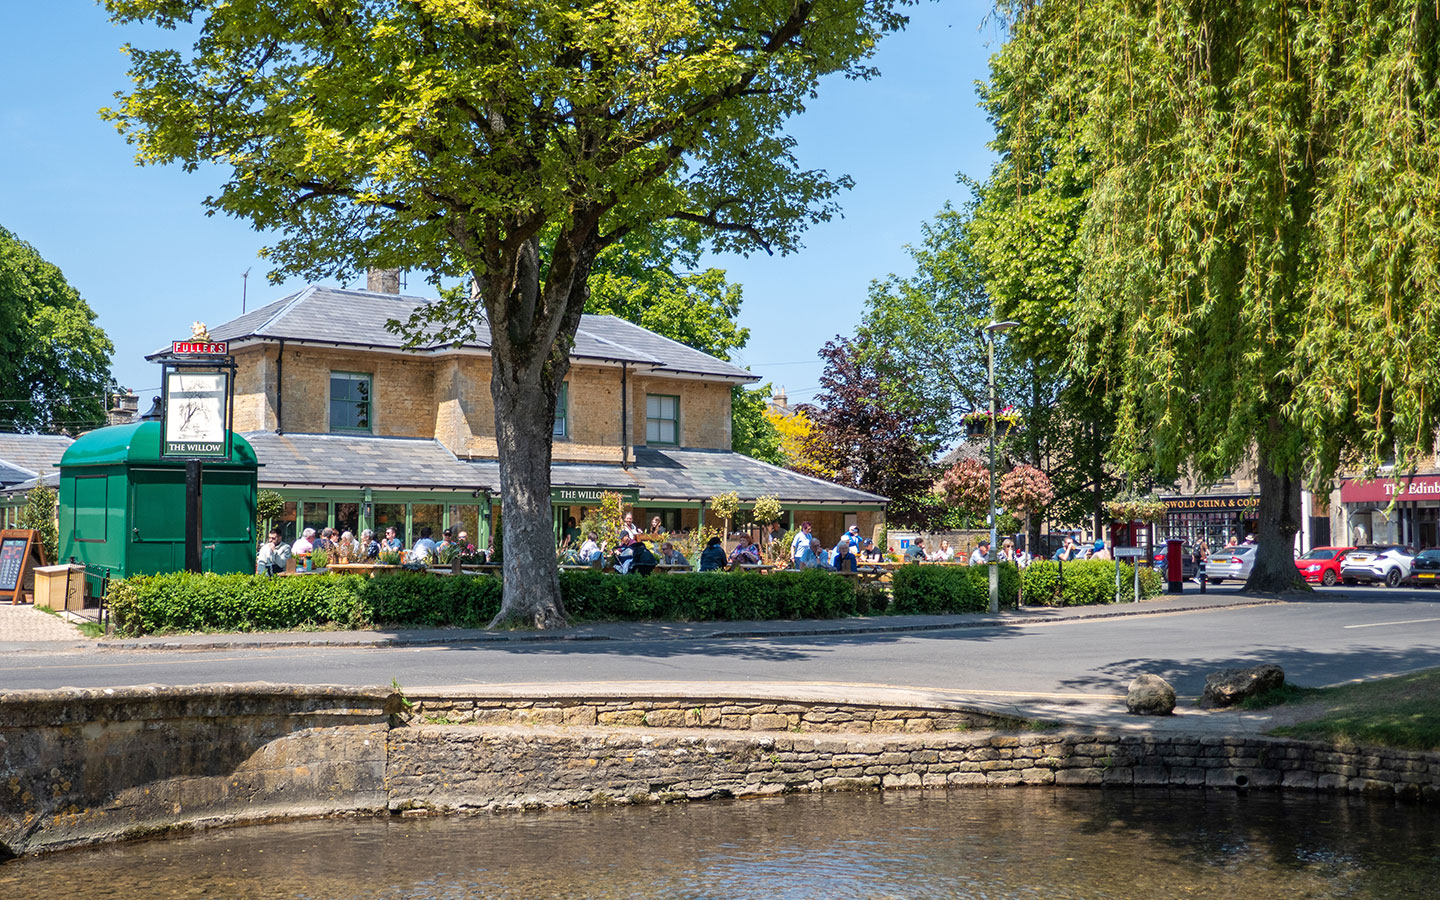 The Willow pub by the waterside in Bourton-on-the-Water